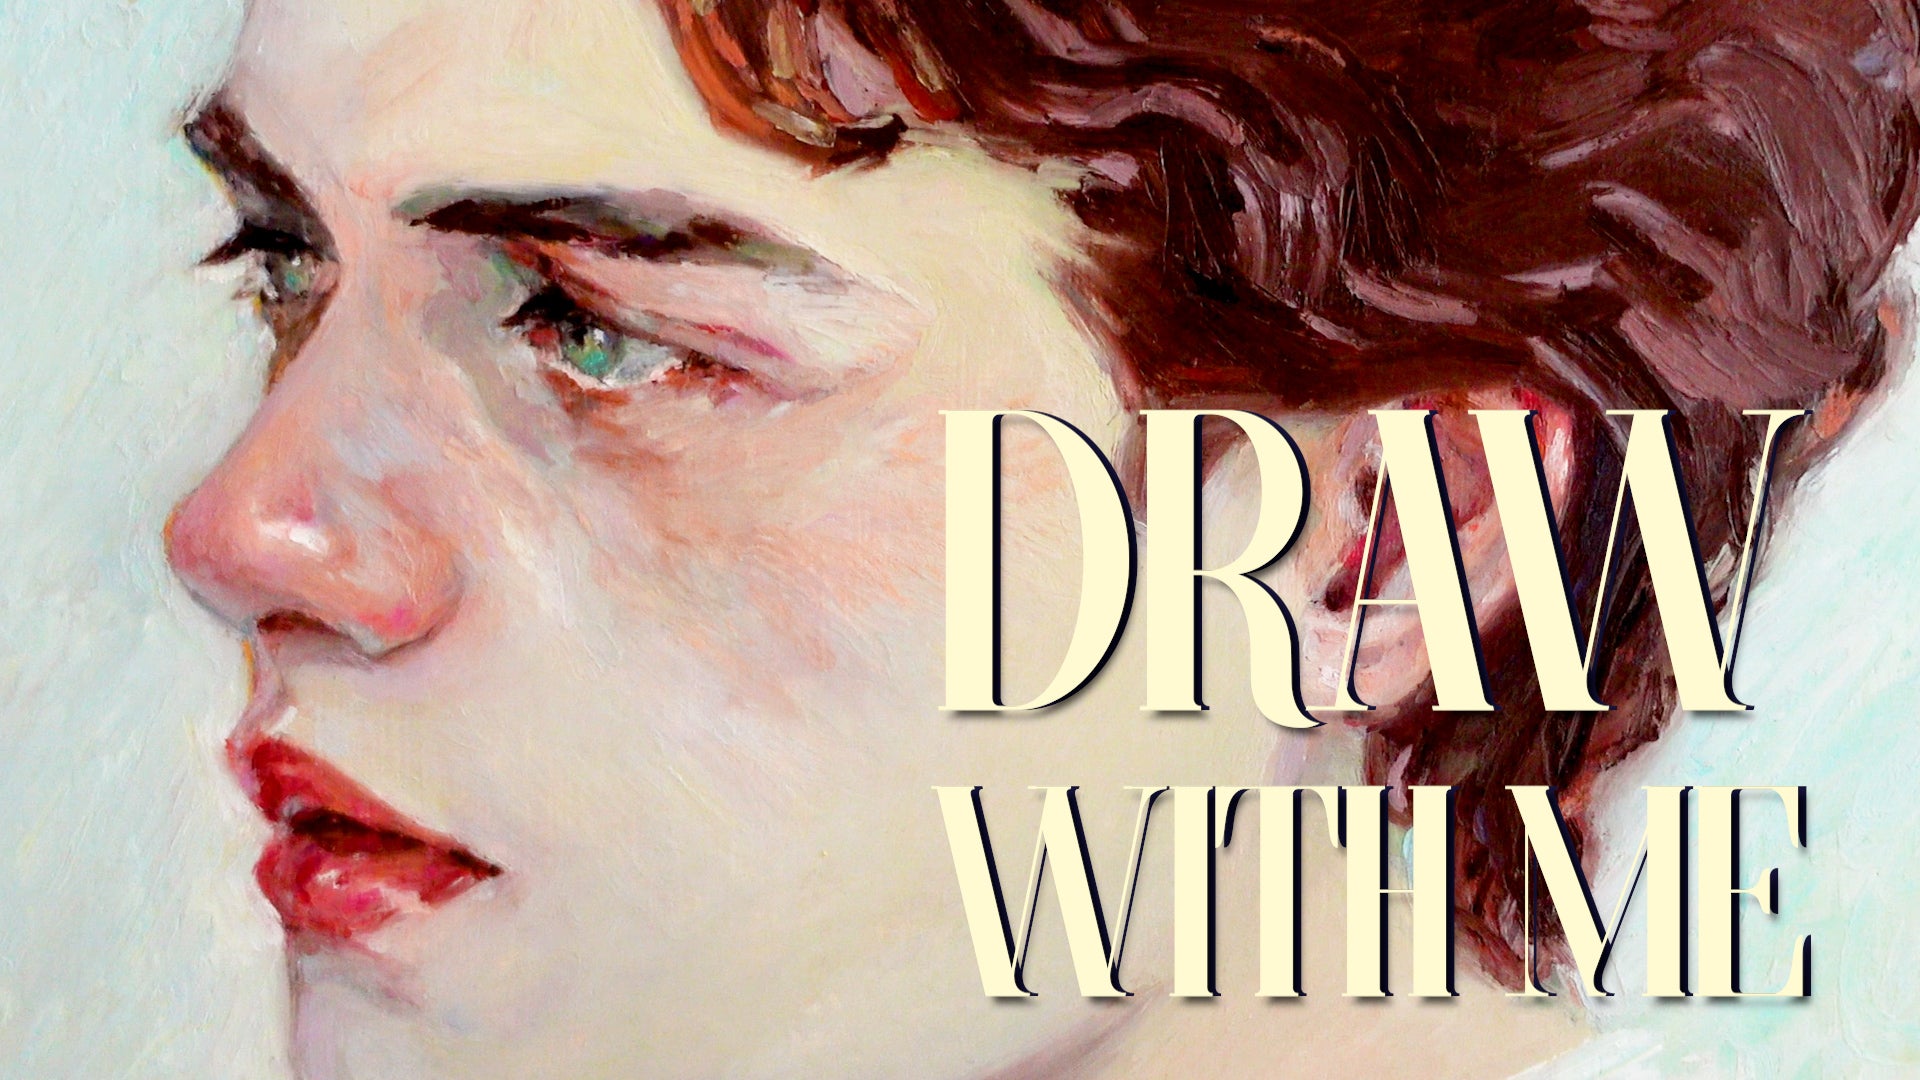 Load video: You can find some of my oil pastel and pencil drawings, and some behind the scenes footage of my process.